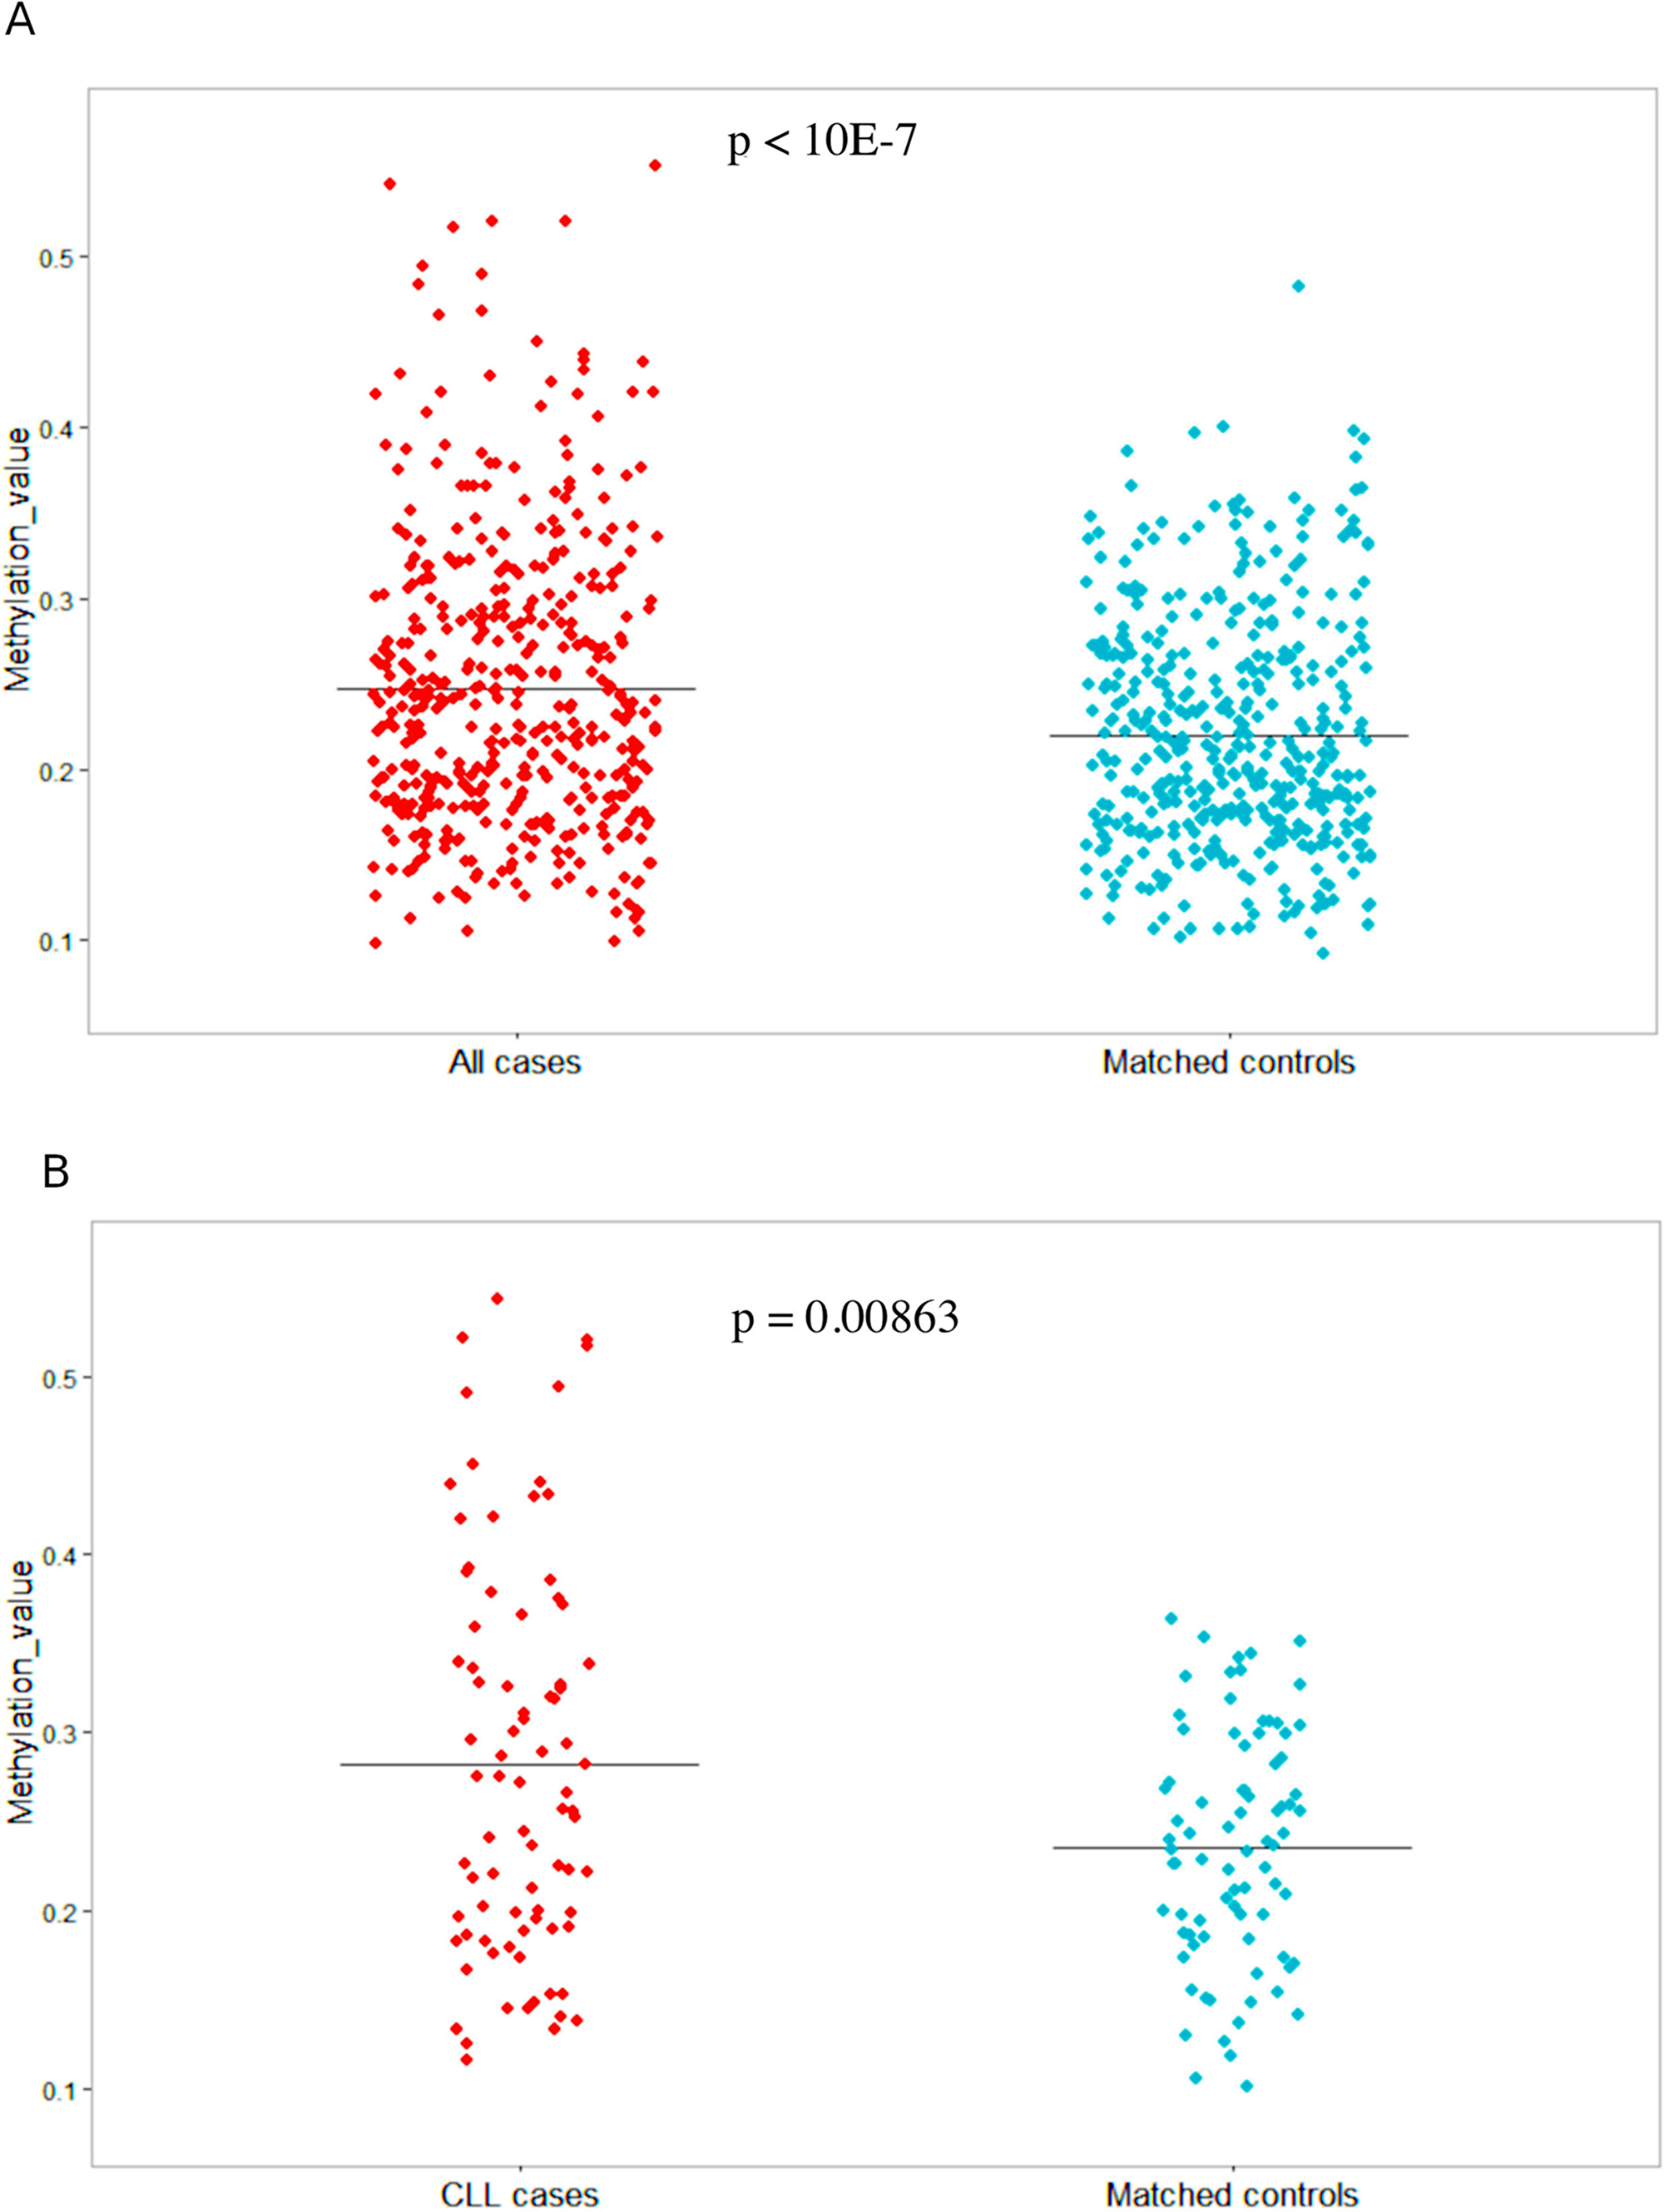 SHANK1 methylation values in 438 MBCN cases/controls and the 82 CLL/SLL cases and controls.